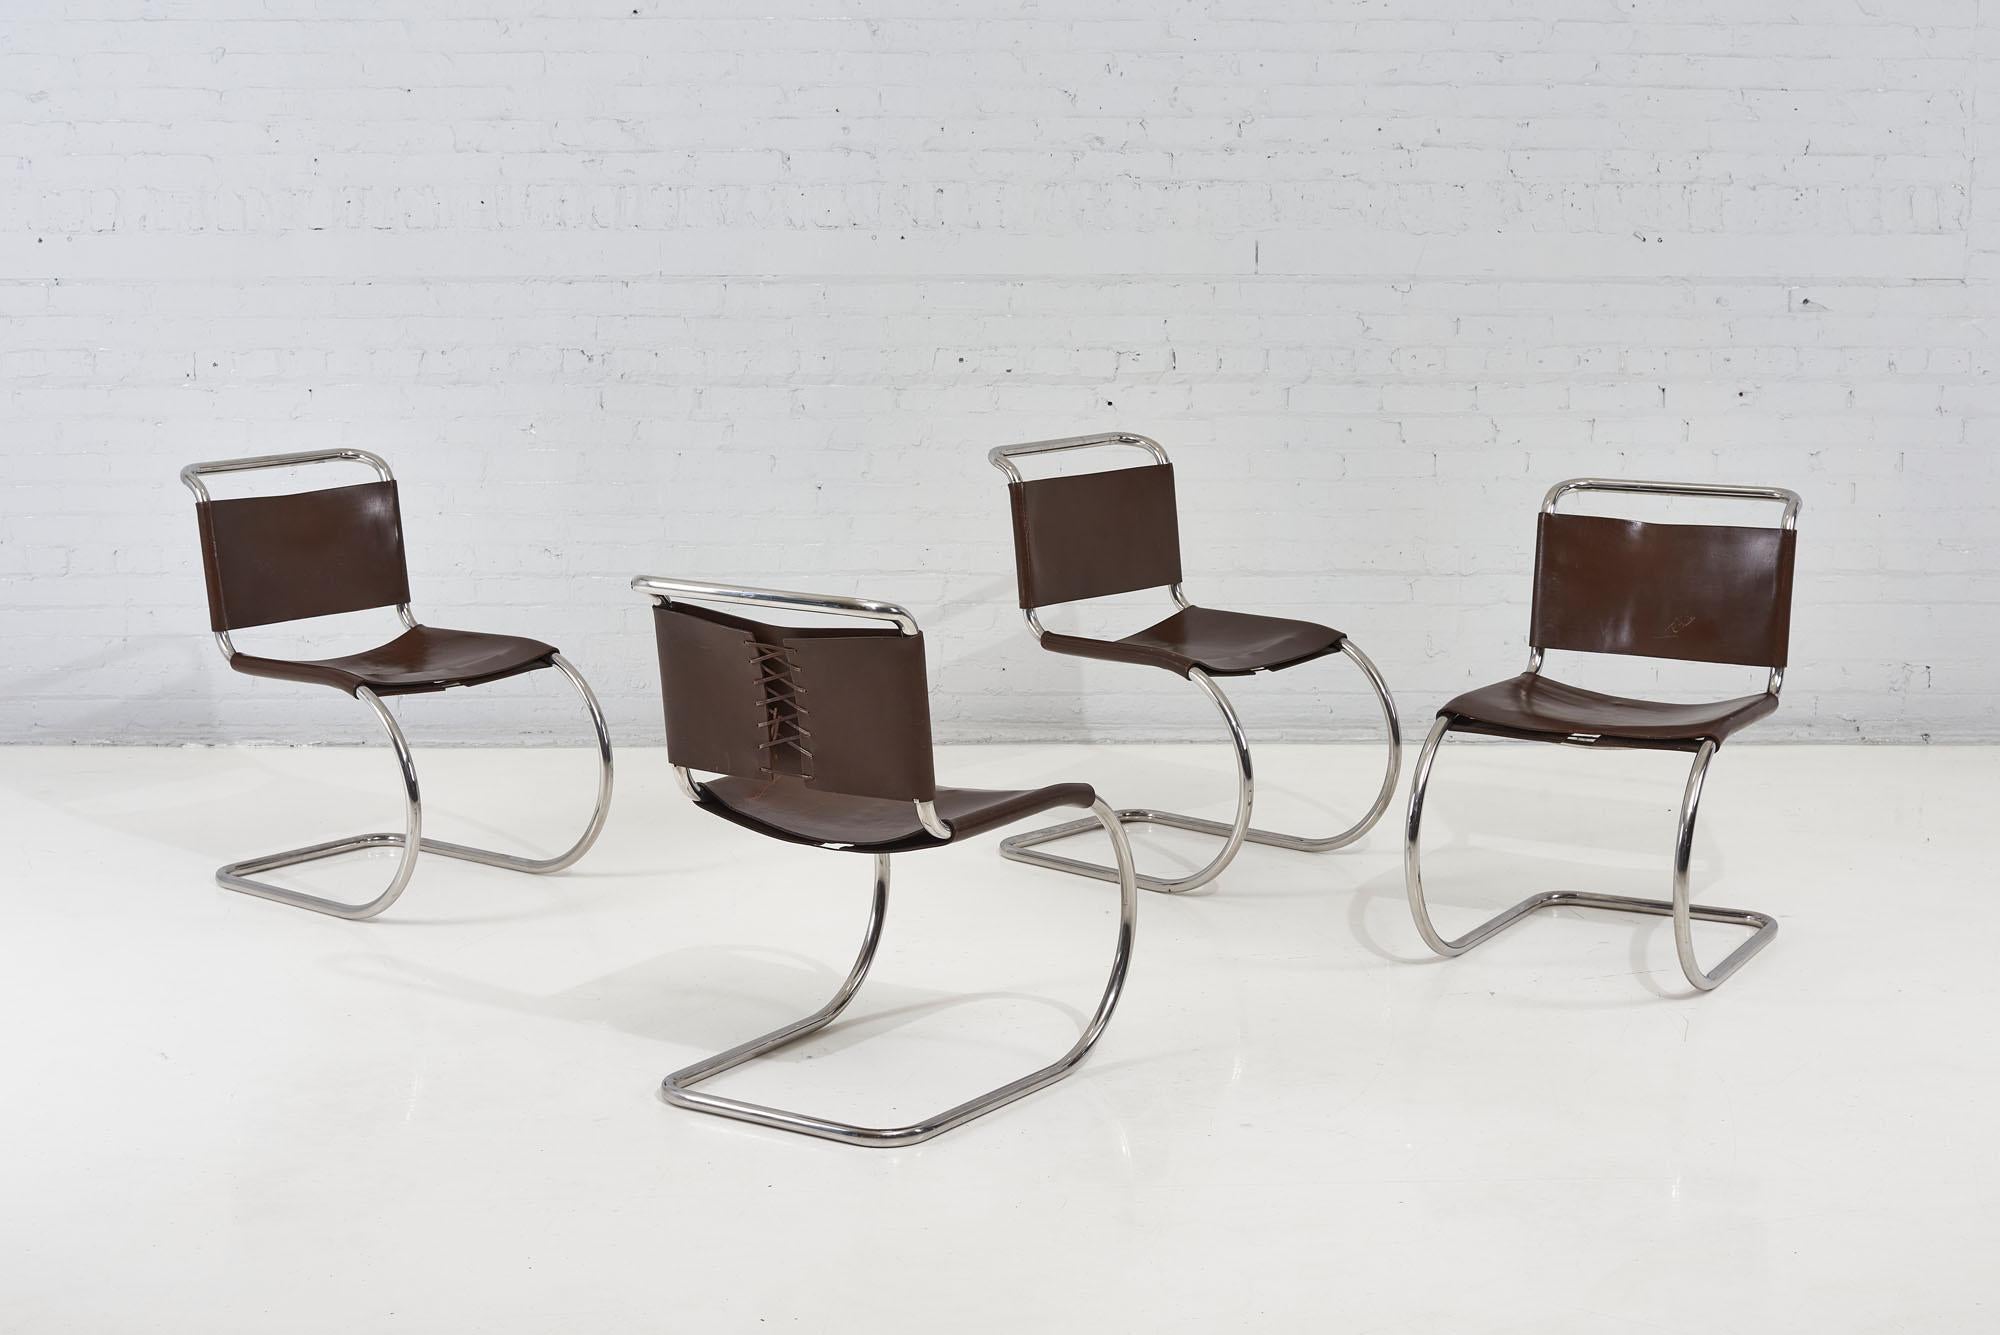 Stainless Steel Mies Van Der Rohe Mr Chairs for Knoll